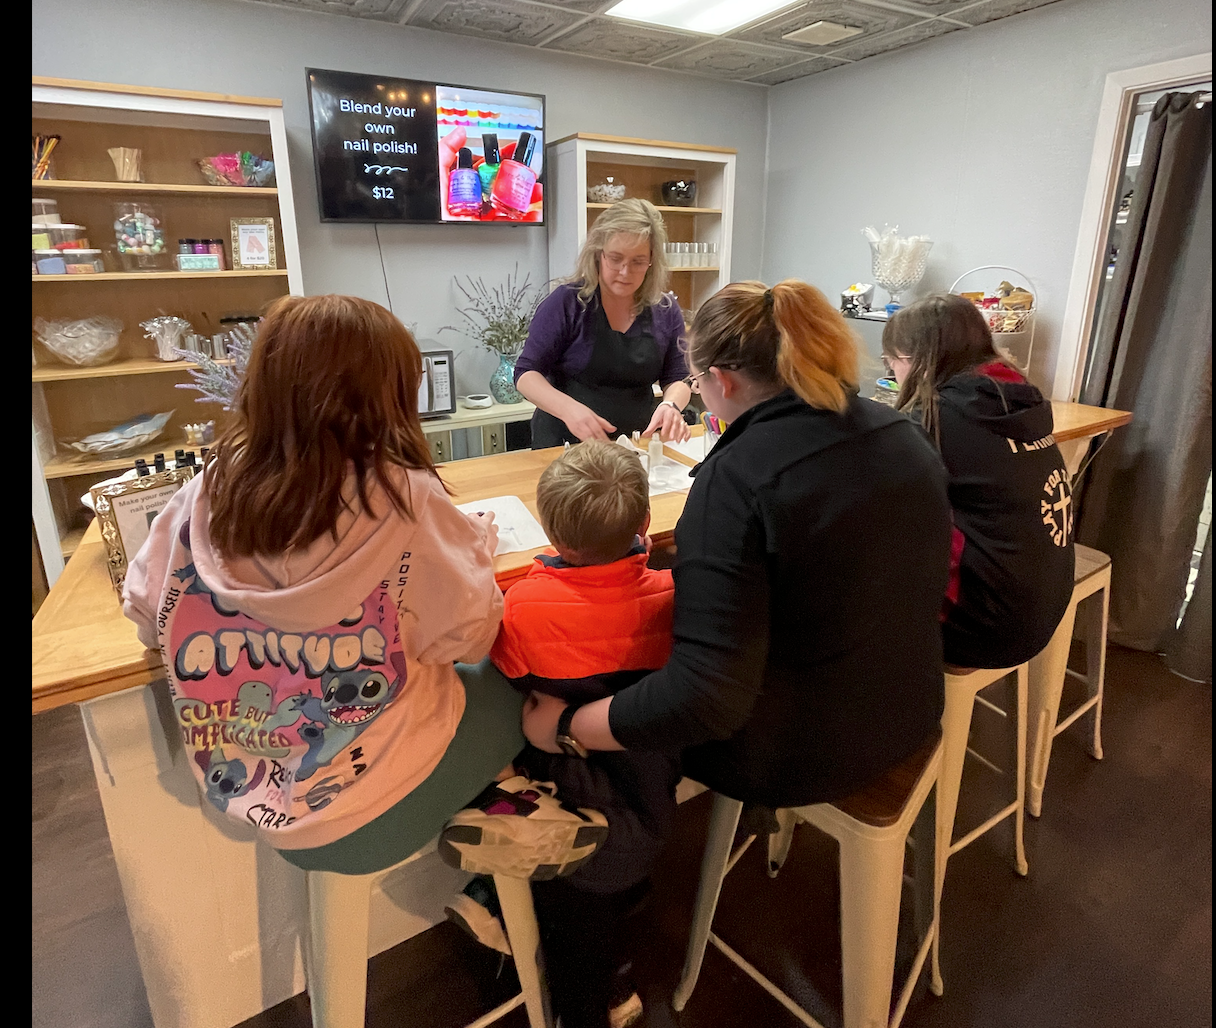 Downtown Menomonee Falls will have its inaugural Make & Take Shop Hop from 11 a.m. to 5 p.m. June 18 to 22.  Pictured, Owner Layla Obregon is working with DIY makers at her downtown Menomonee Falls business, Poppy &Thyme. In Poppy & Thyme's expanded space, people can come in to create personalized scented candles, wax melts, perfumes and nail polish.